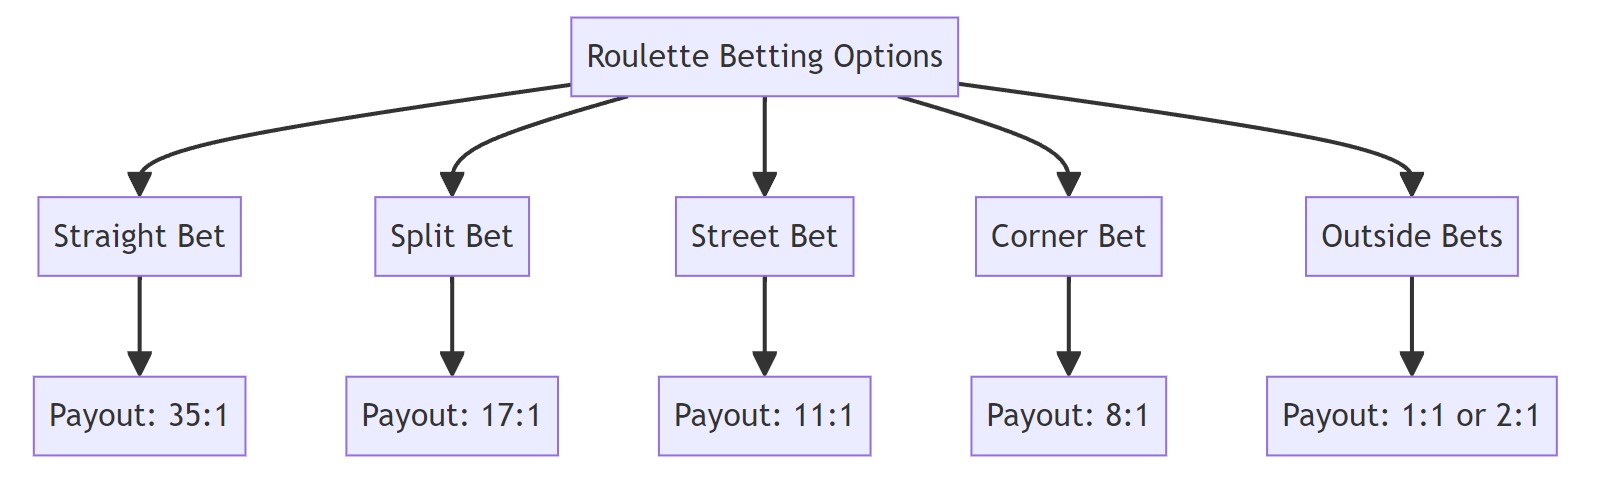 MyStake Roulette Betting Options